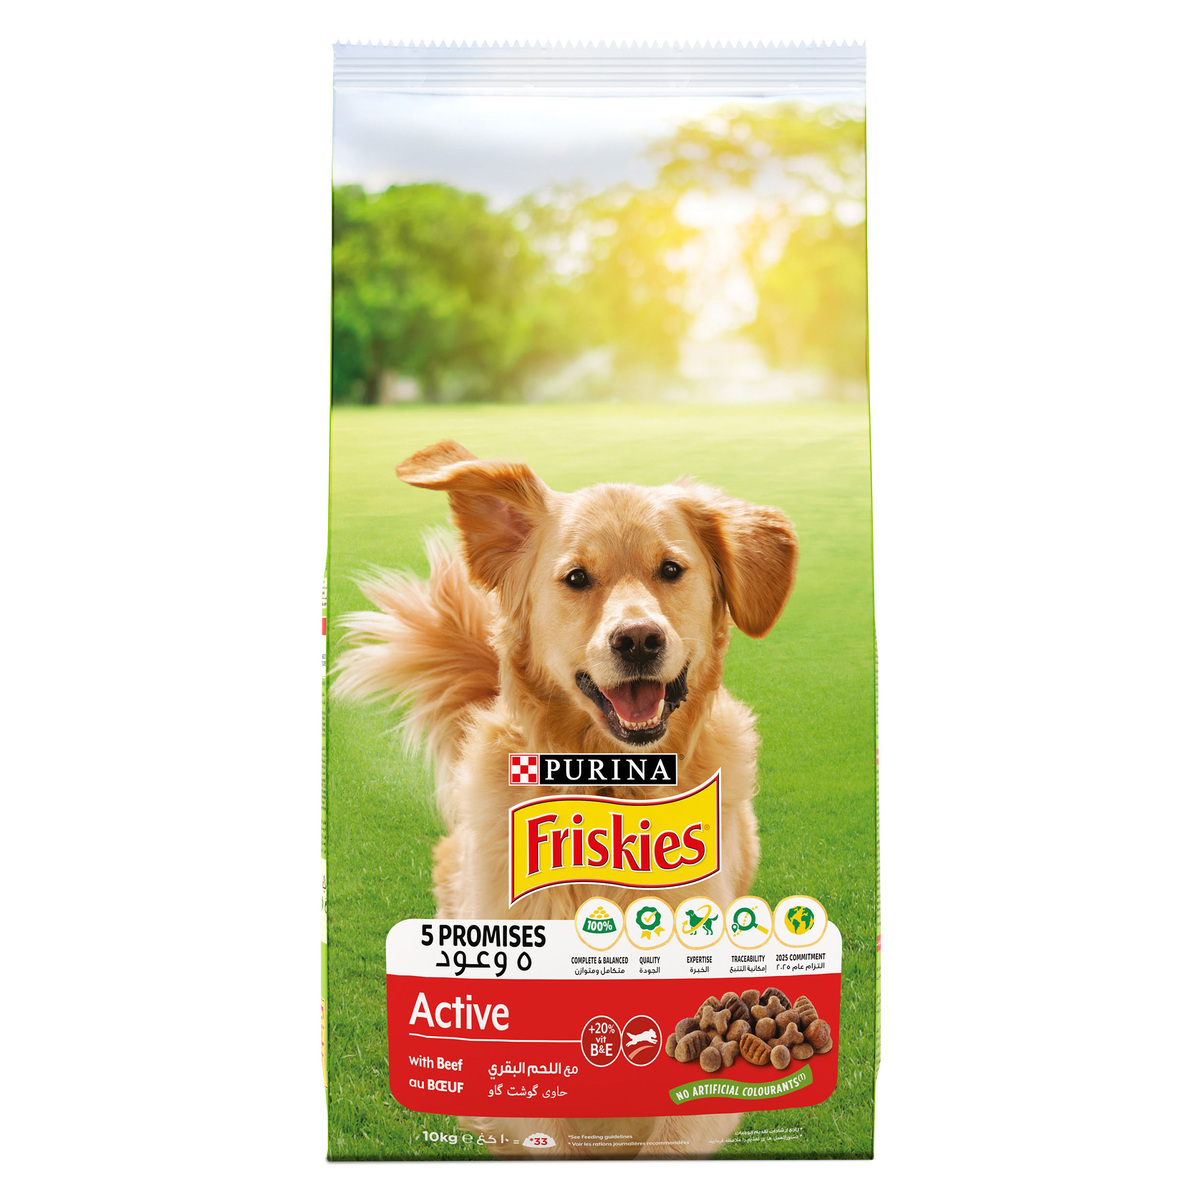 Purina Friskies Active Dog Food with Beef 10kg